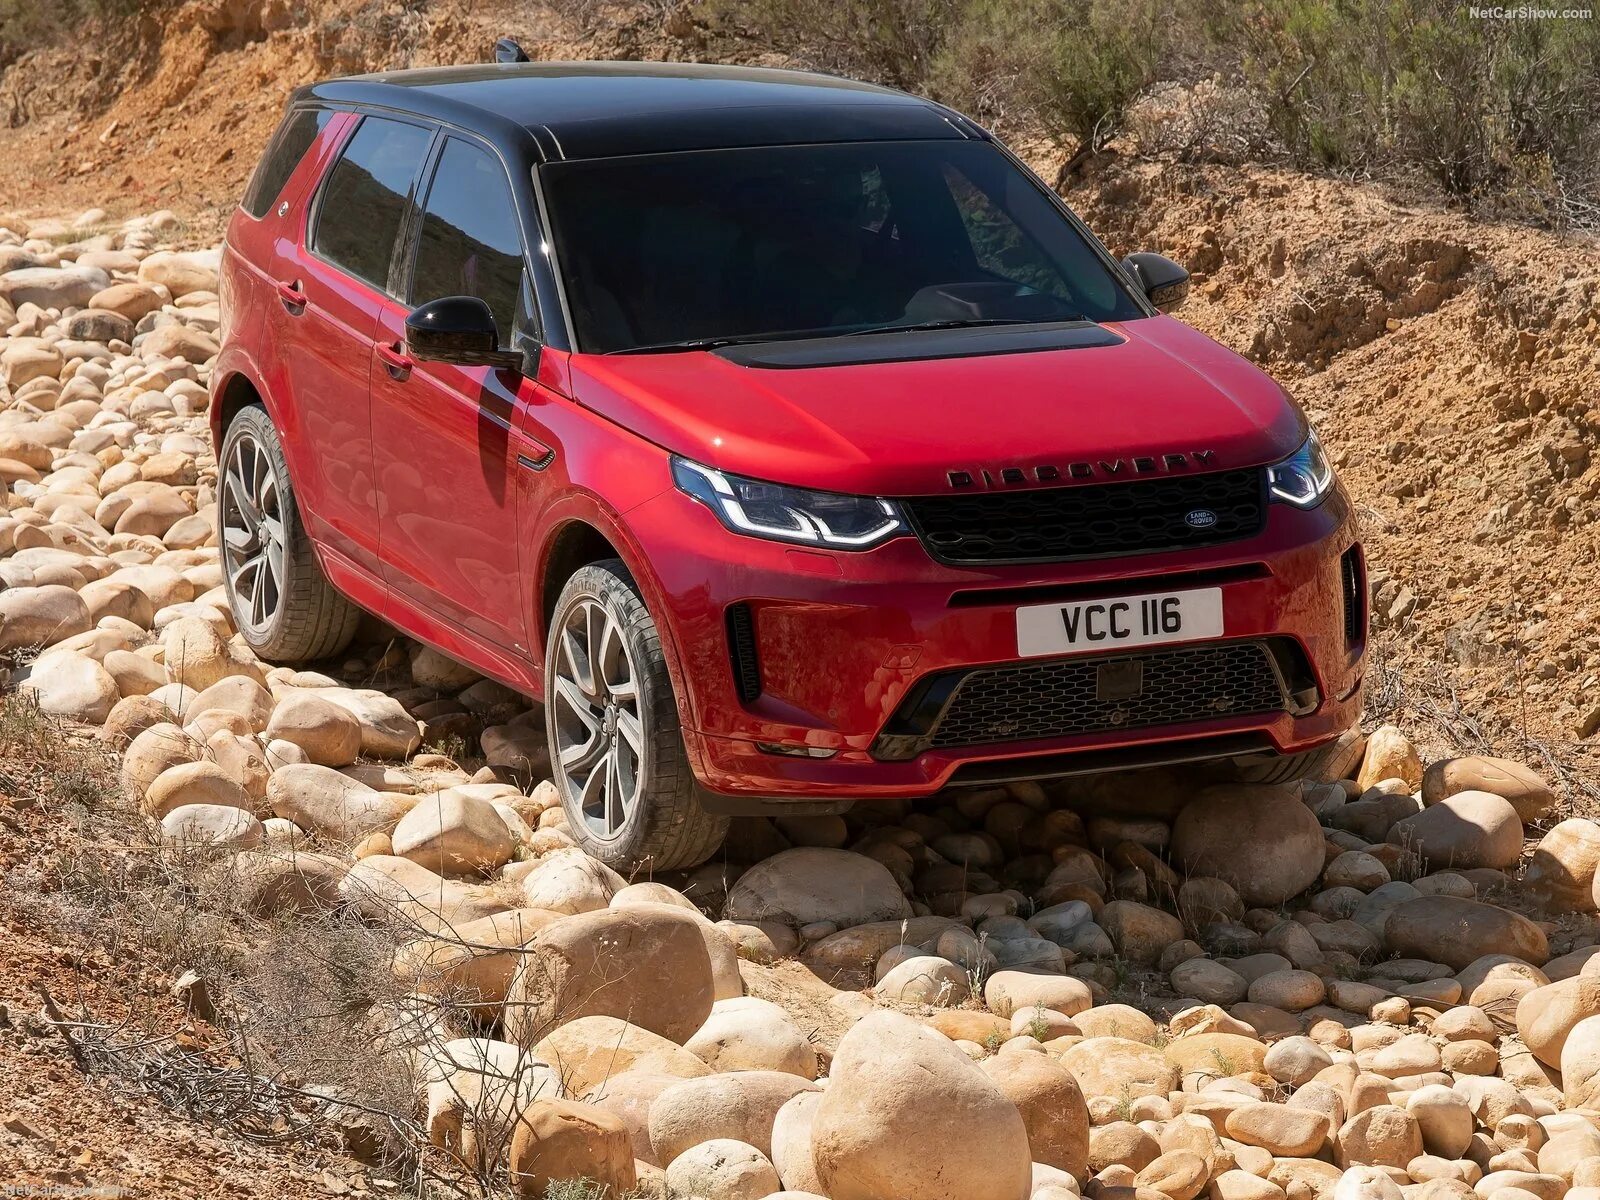 Land Rover Discovery Sport 2021. Range Rover Discovery Sport 2021. Land Rover Discovery Sport 2022. Discovery Sport 2021.